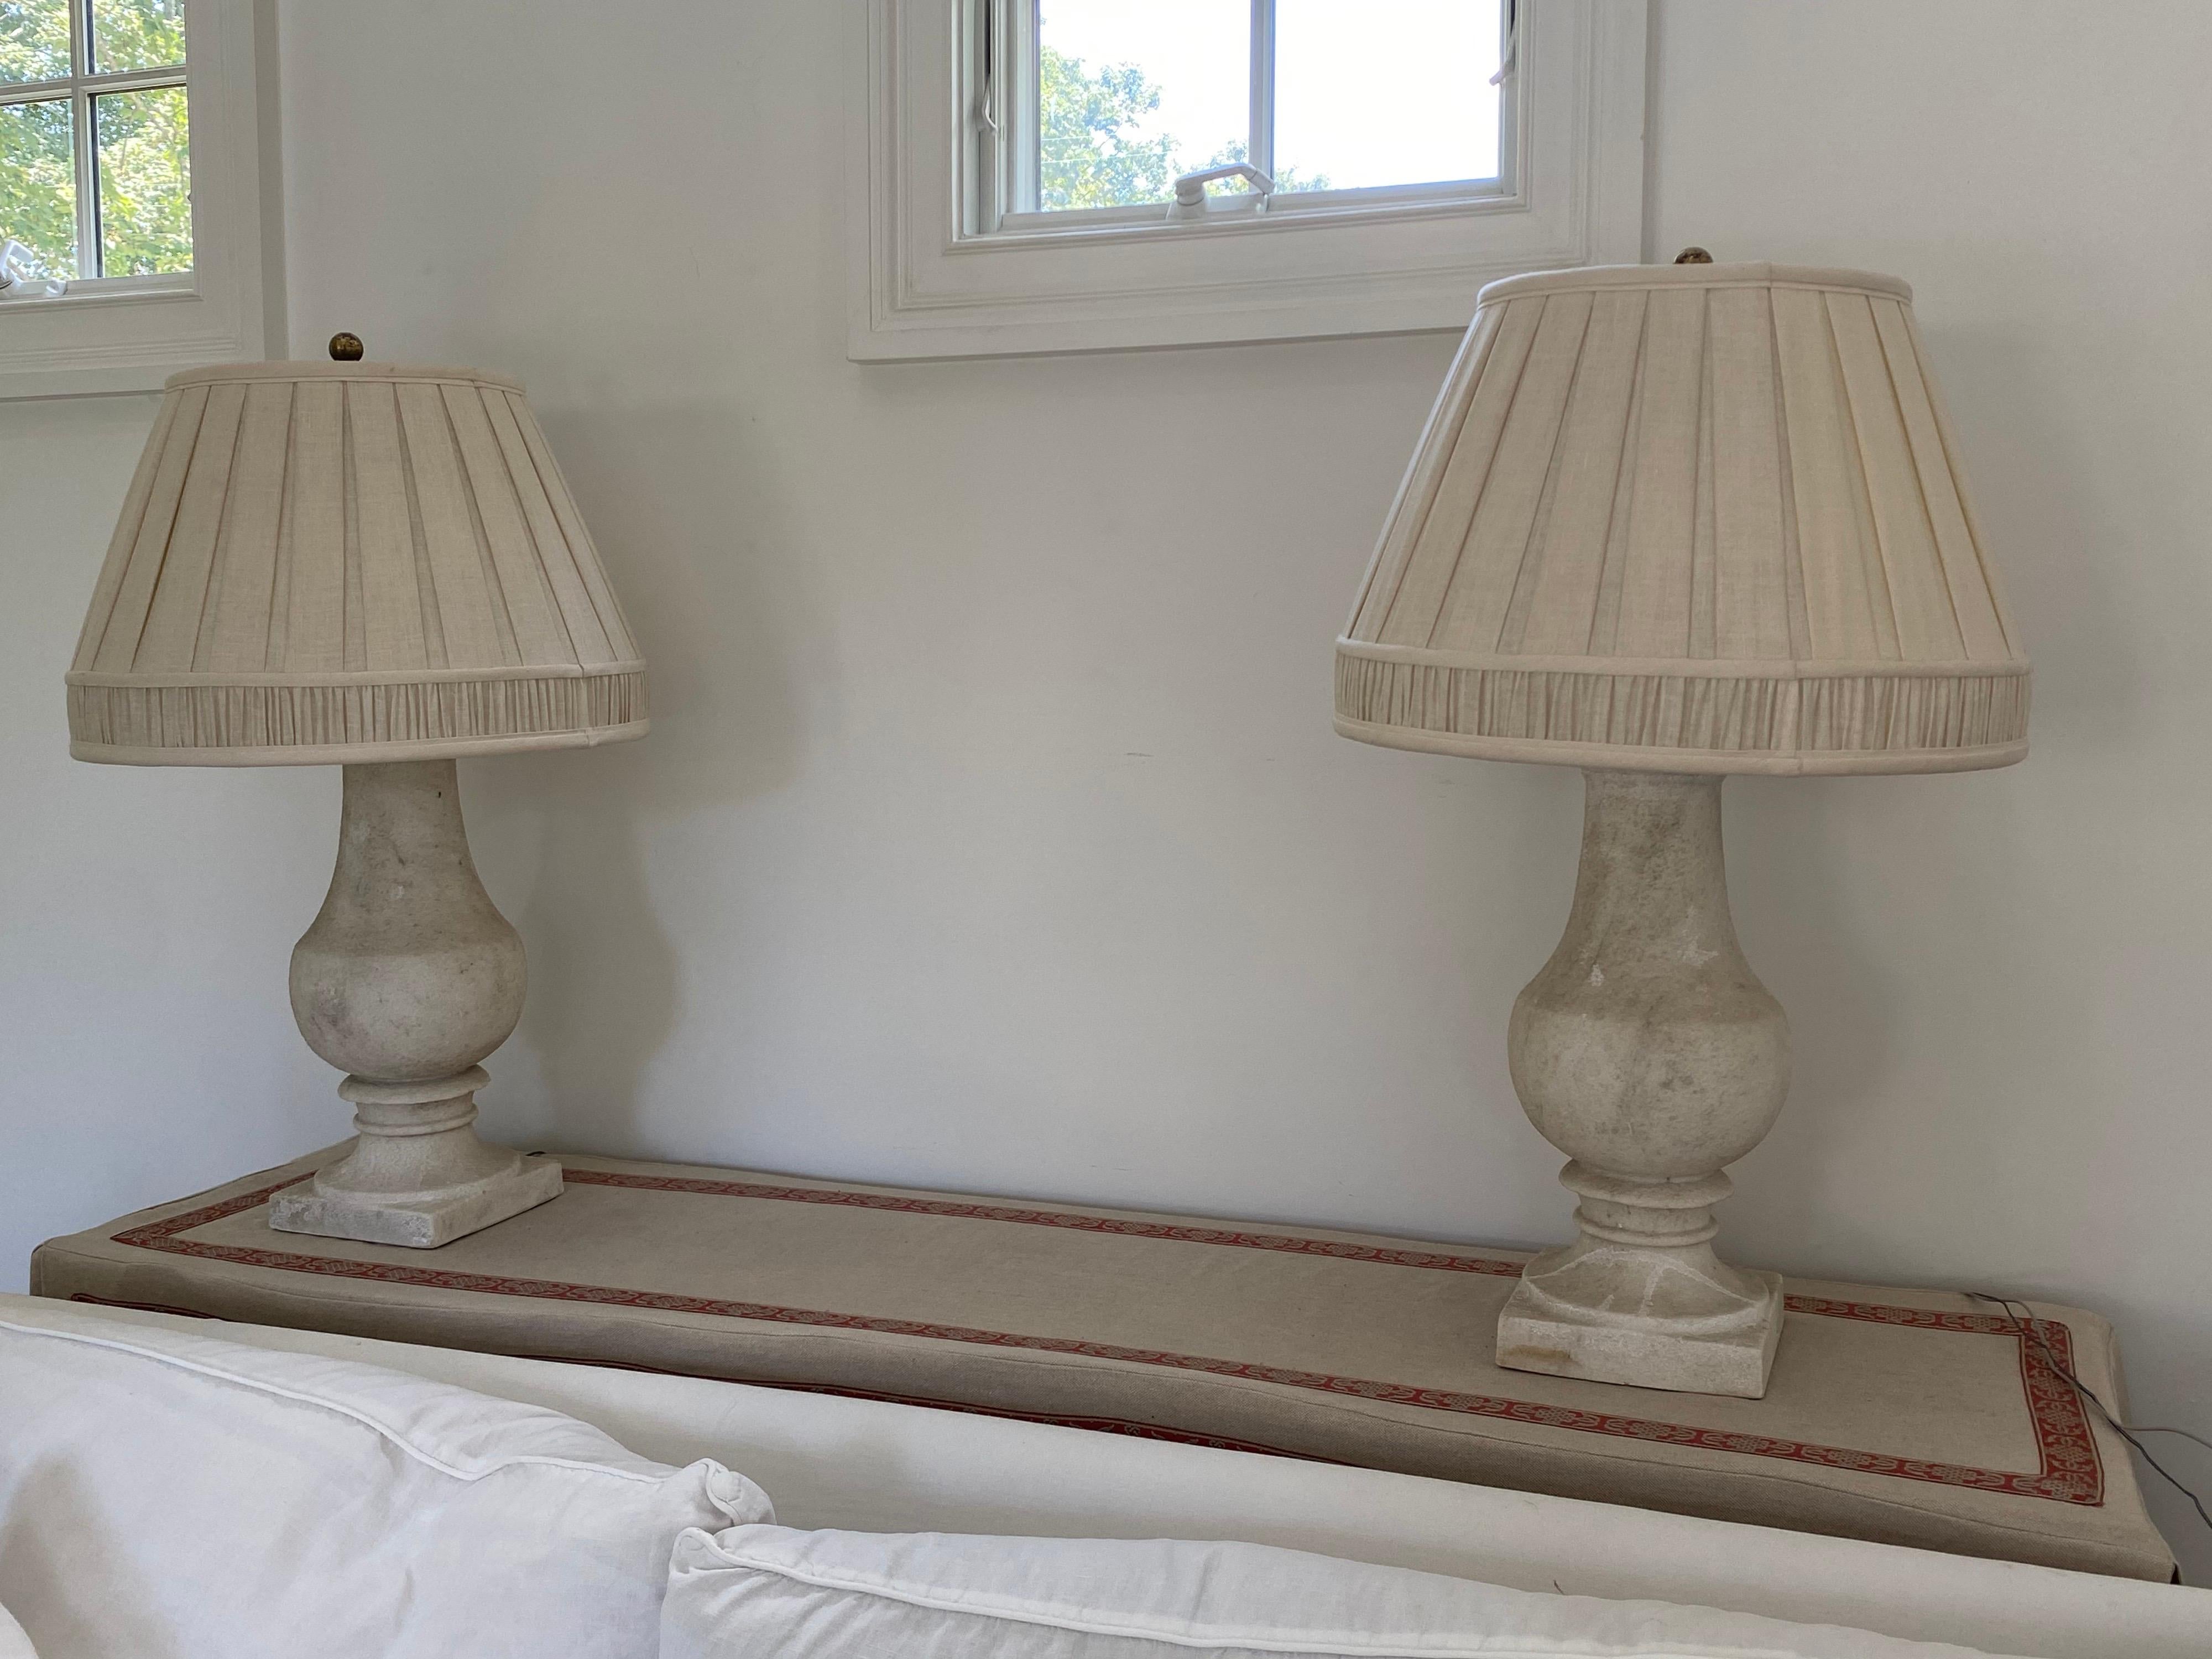 Pair of stone lamps, late 20th century, 
Classic shape in solid stone form. Sold with pleated shades unless otherwise advised. 
Some knicks and wear to stone. Good working, electrified condition. Shades have some fading and general wear. Very